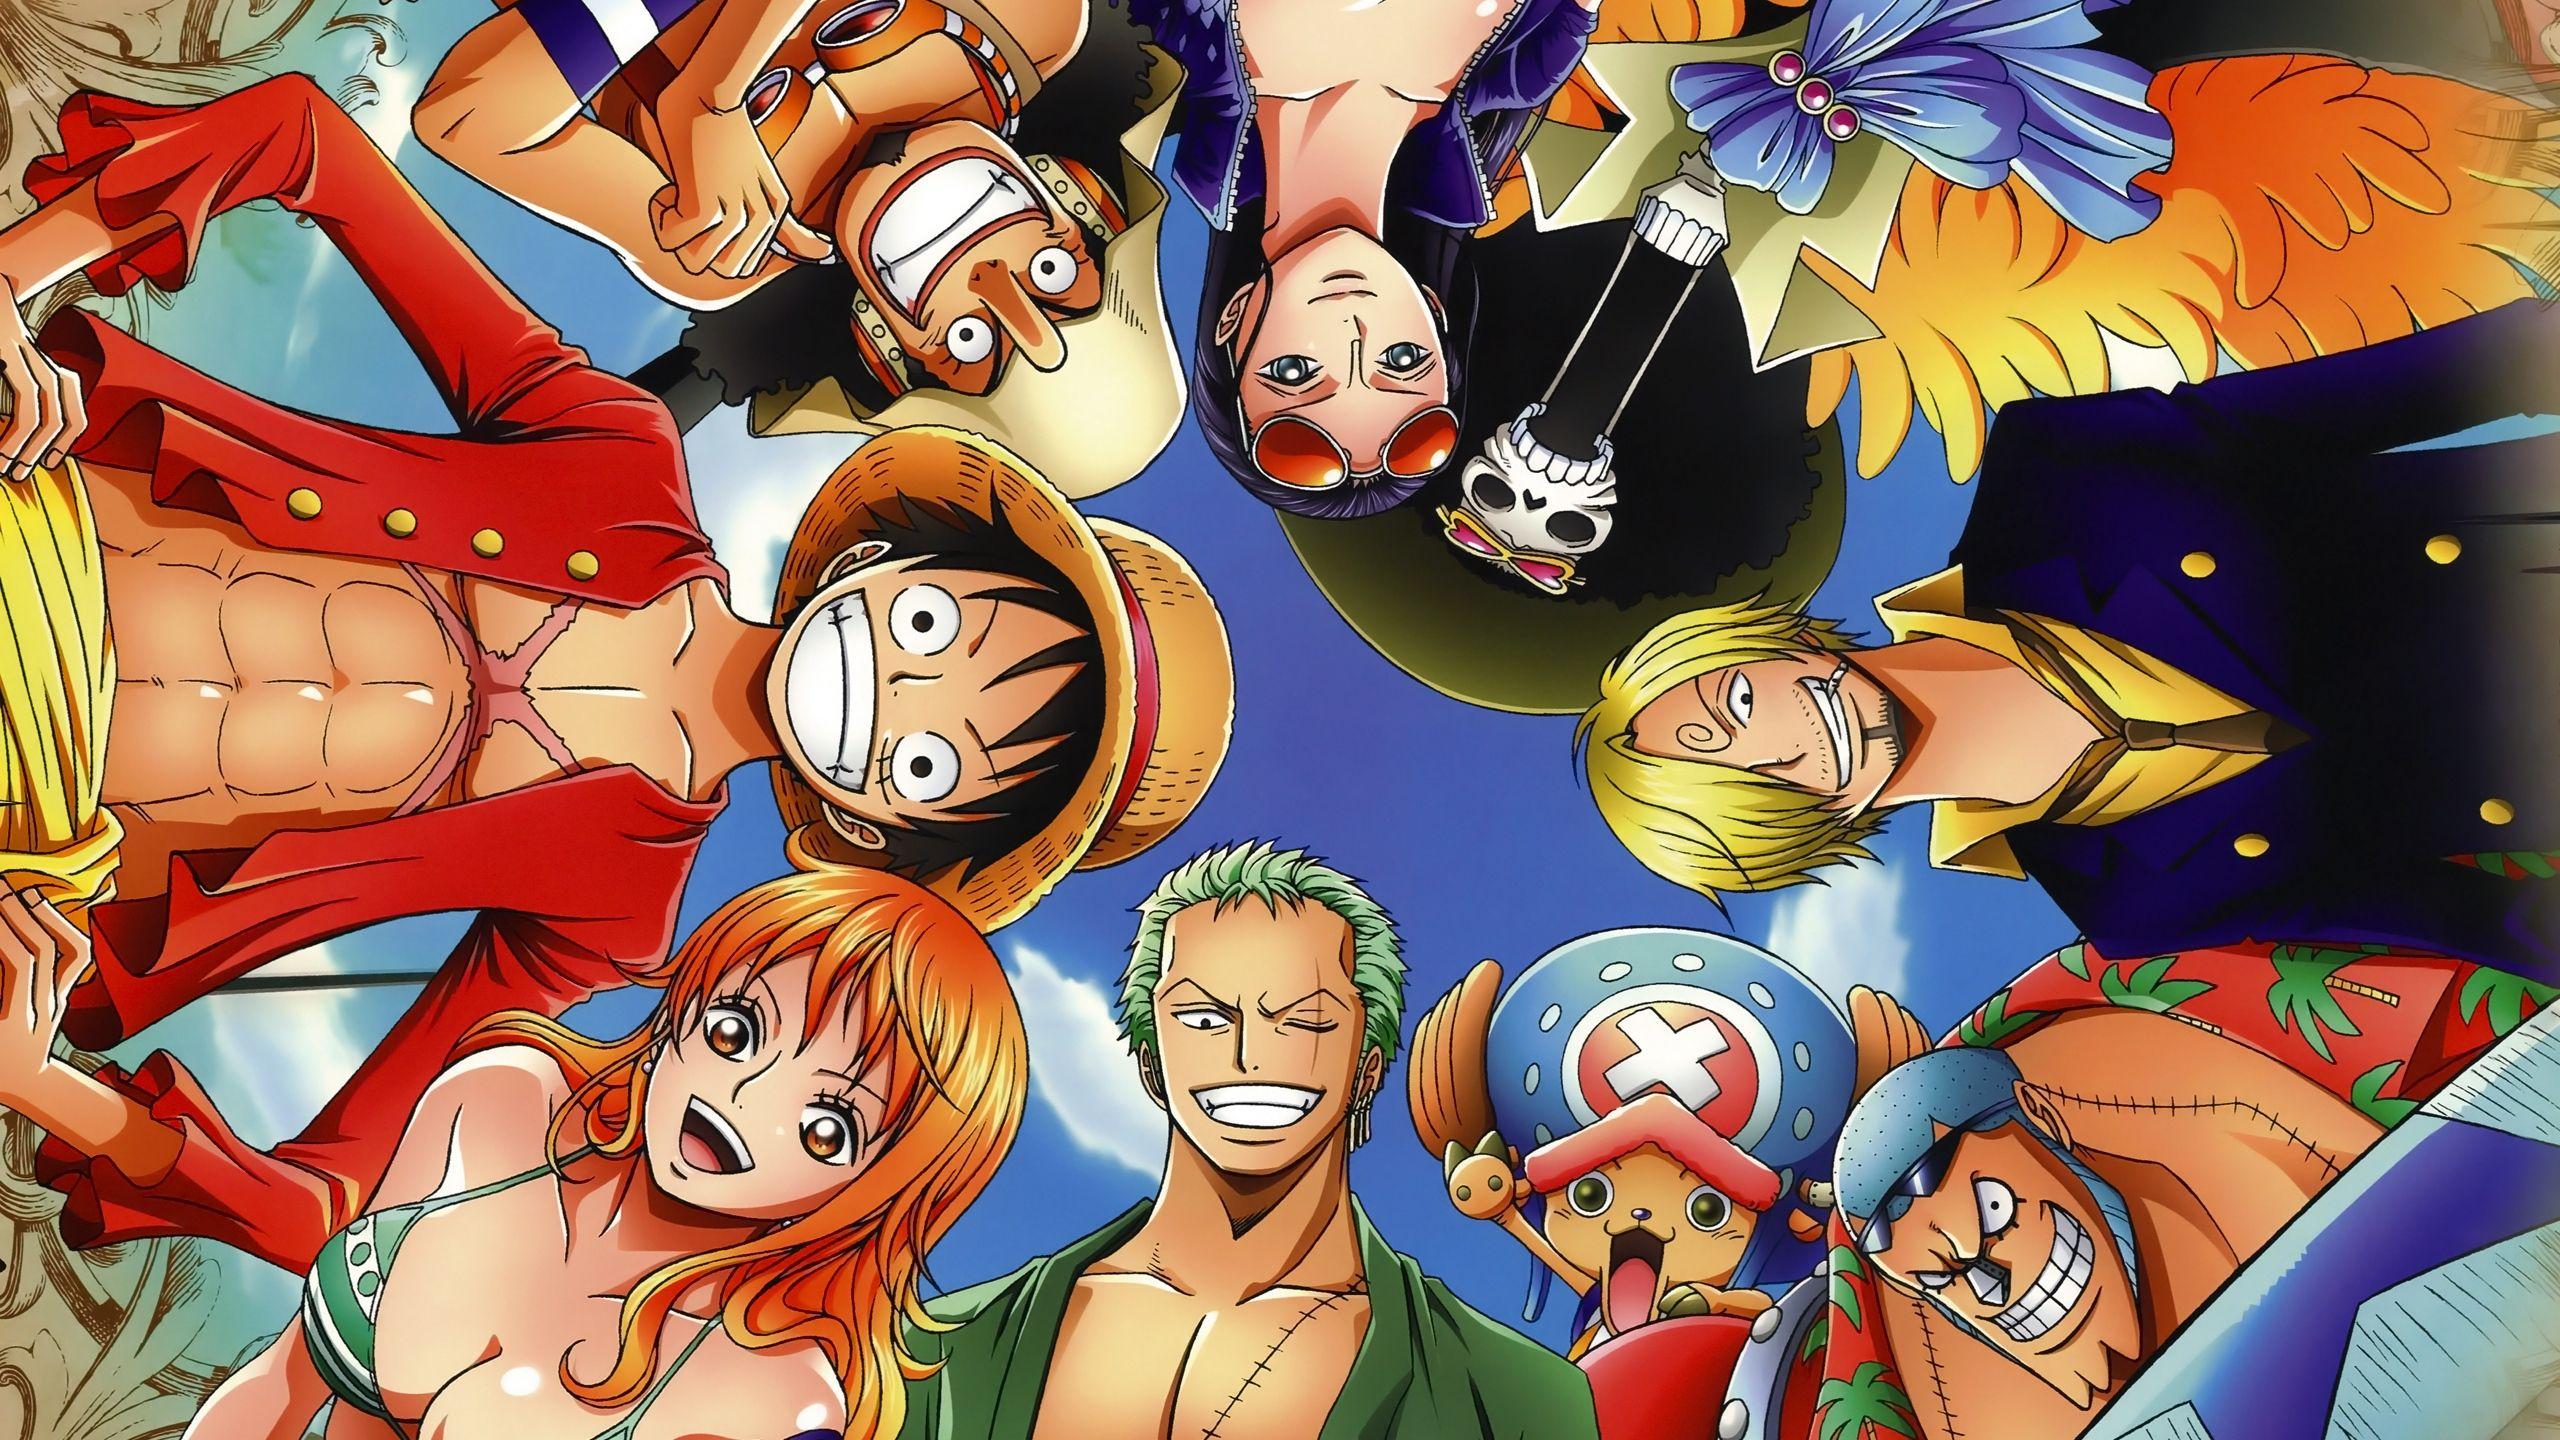 firewall36 image One piece HD wallpaper and background photo